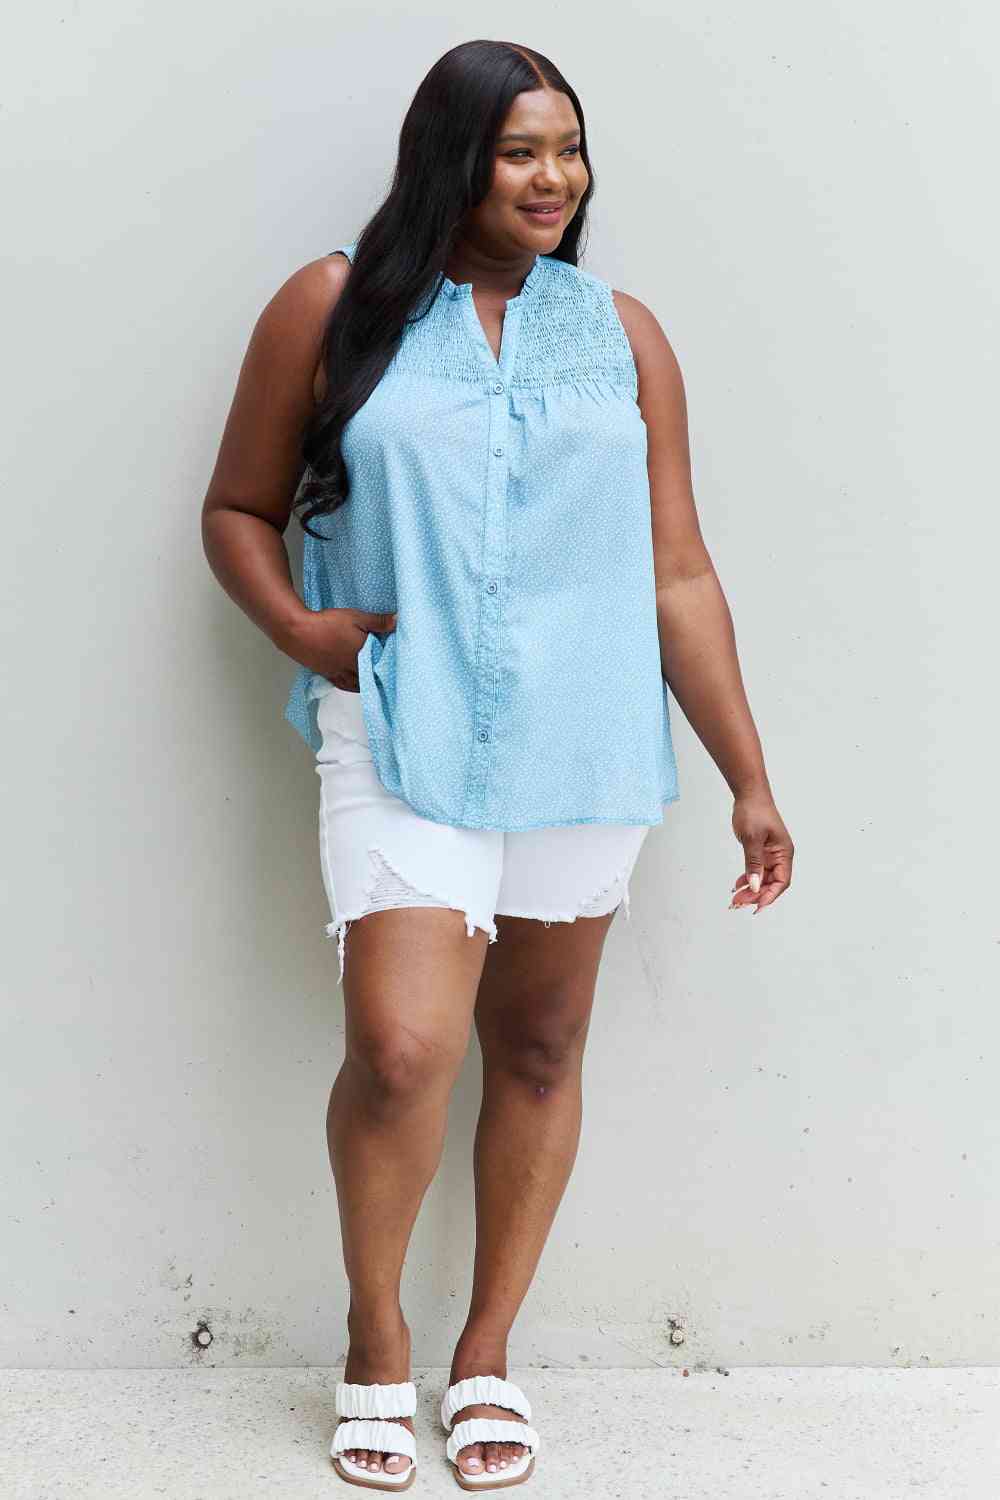 HEYSON She Means Business Full Size Ruffled Floral Flare Shirt  Southern Soul Collectives